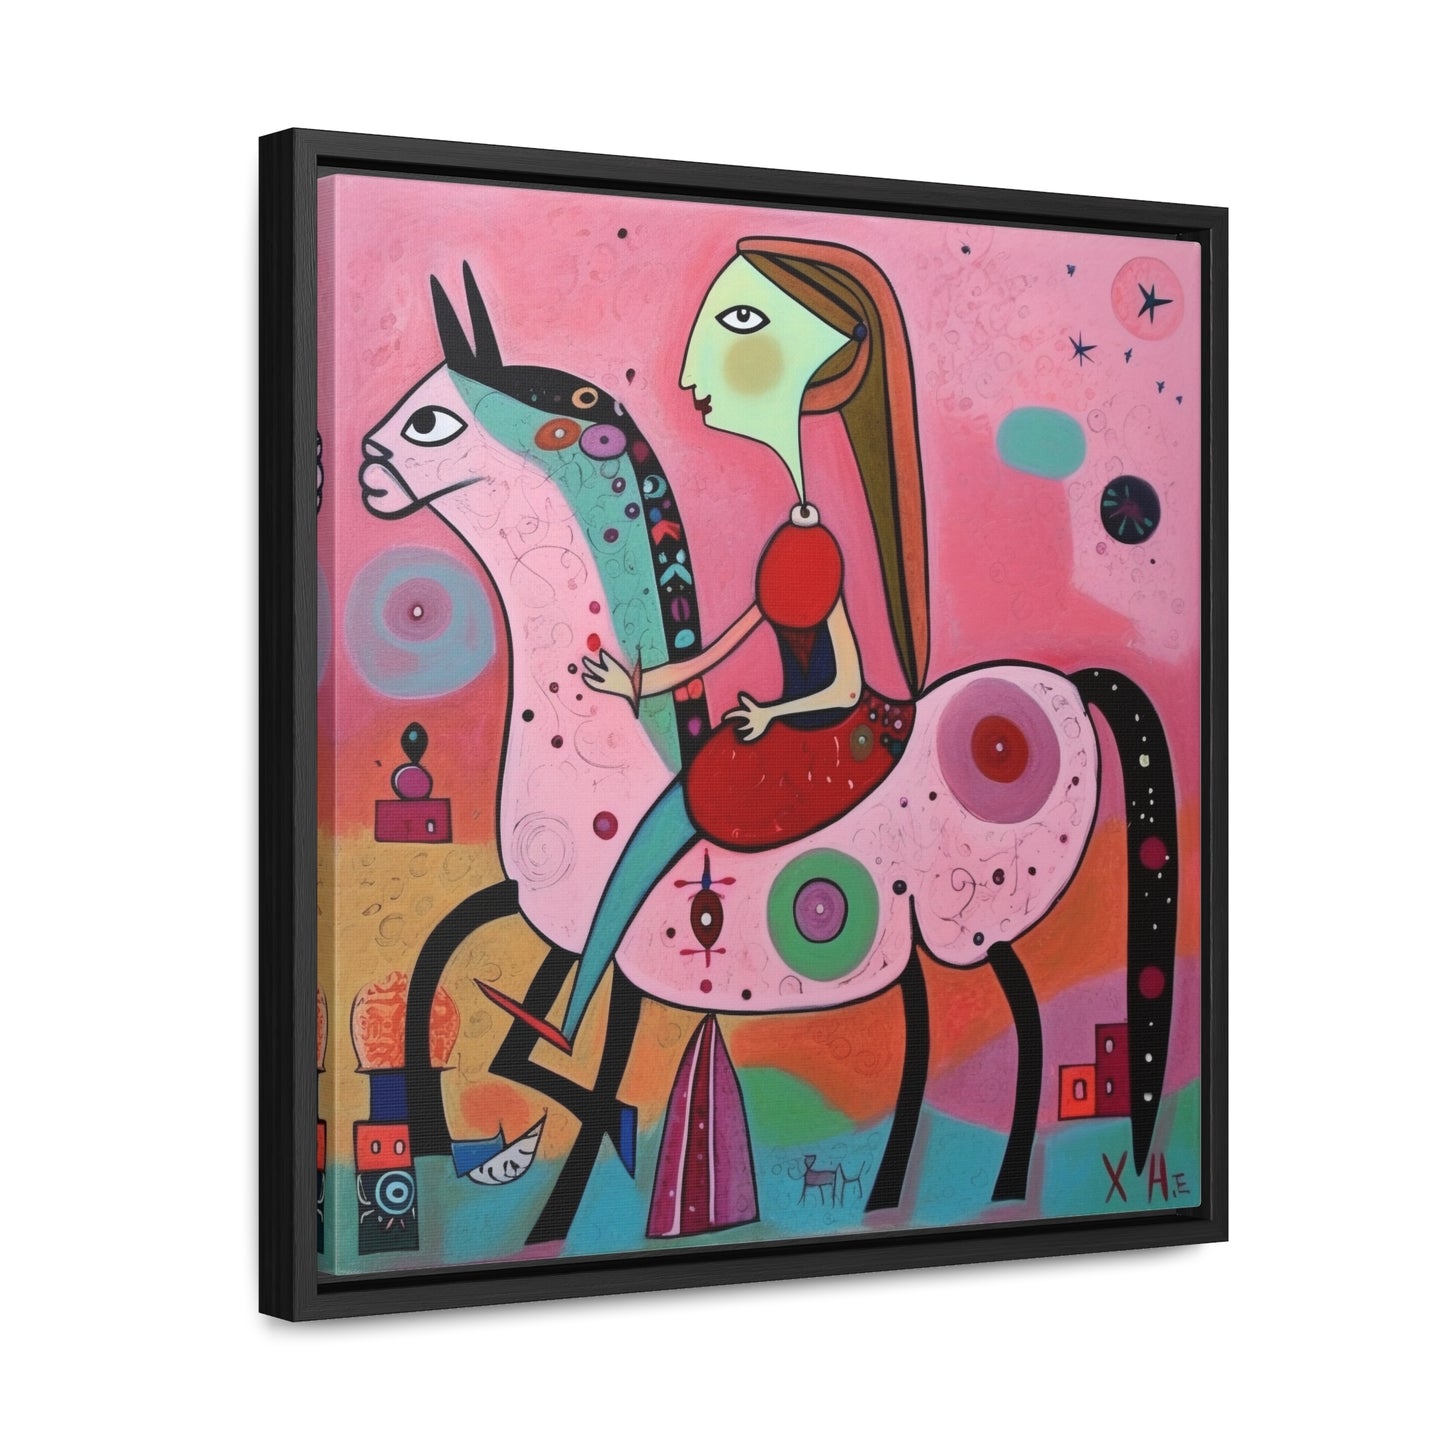 The Dreams of the Child 54, Gallery Canvas Wraps, Square Frame